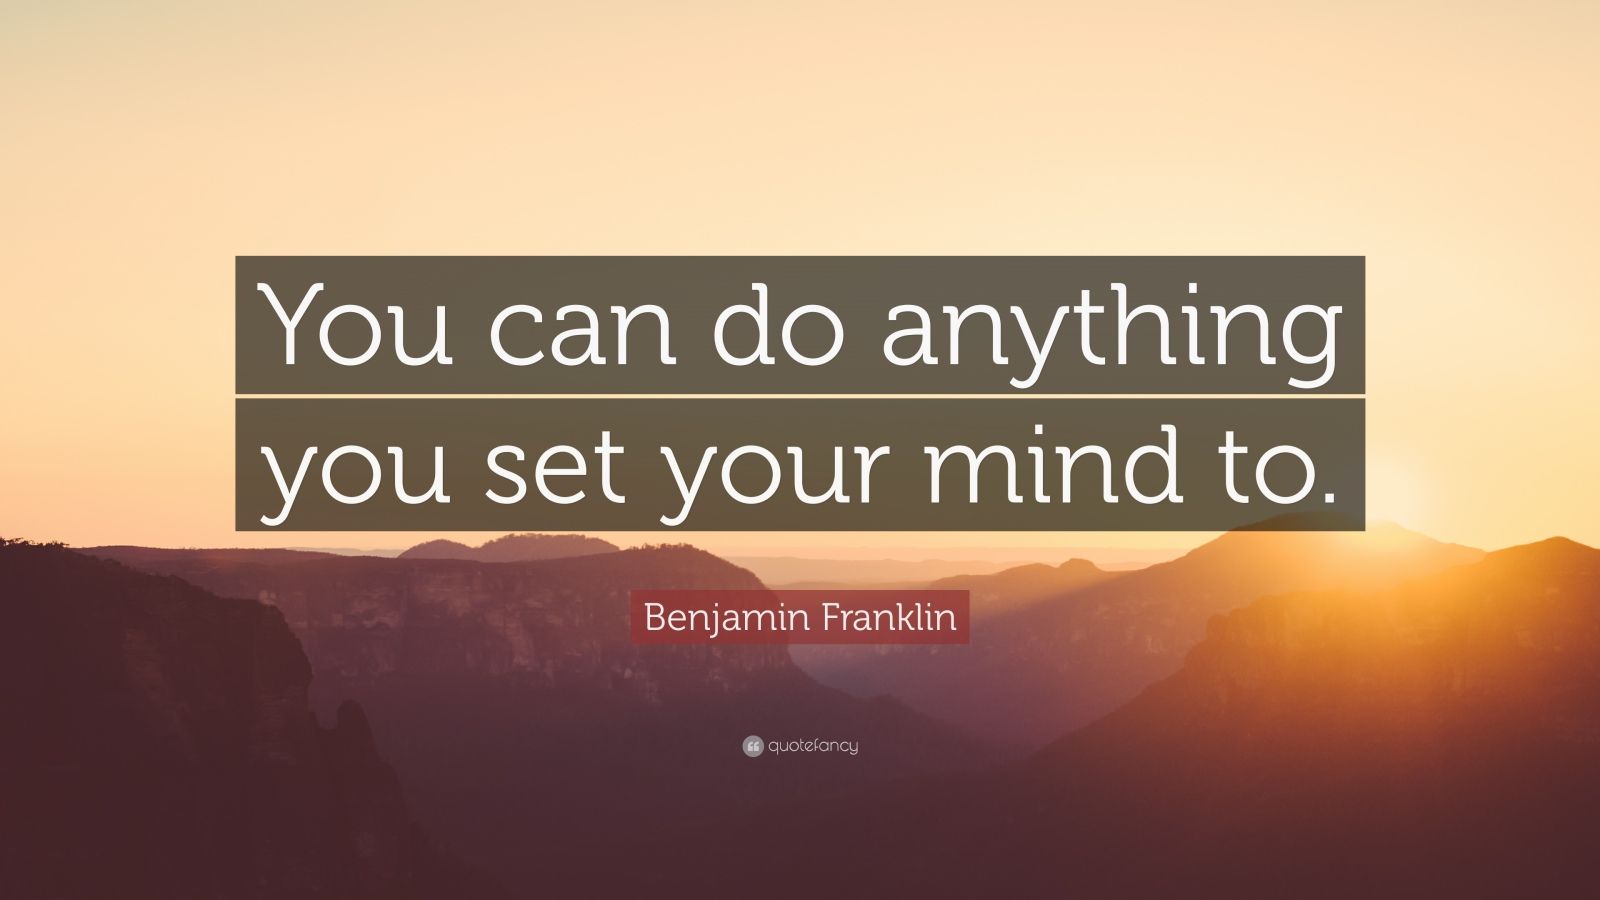 Benjamin Franklin Quote “you Can Do Anything You Set Your Mind To